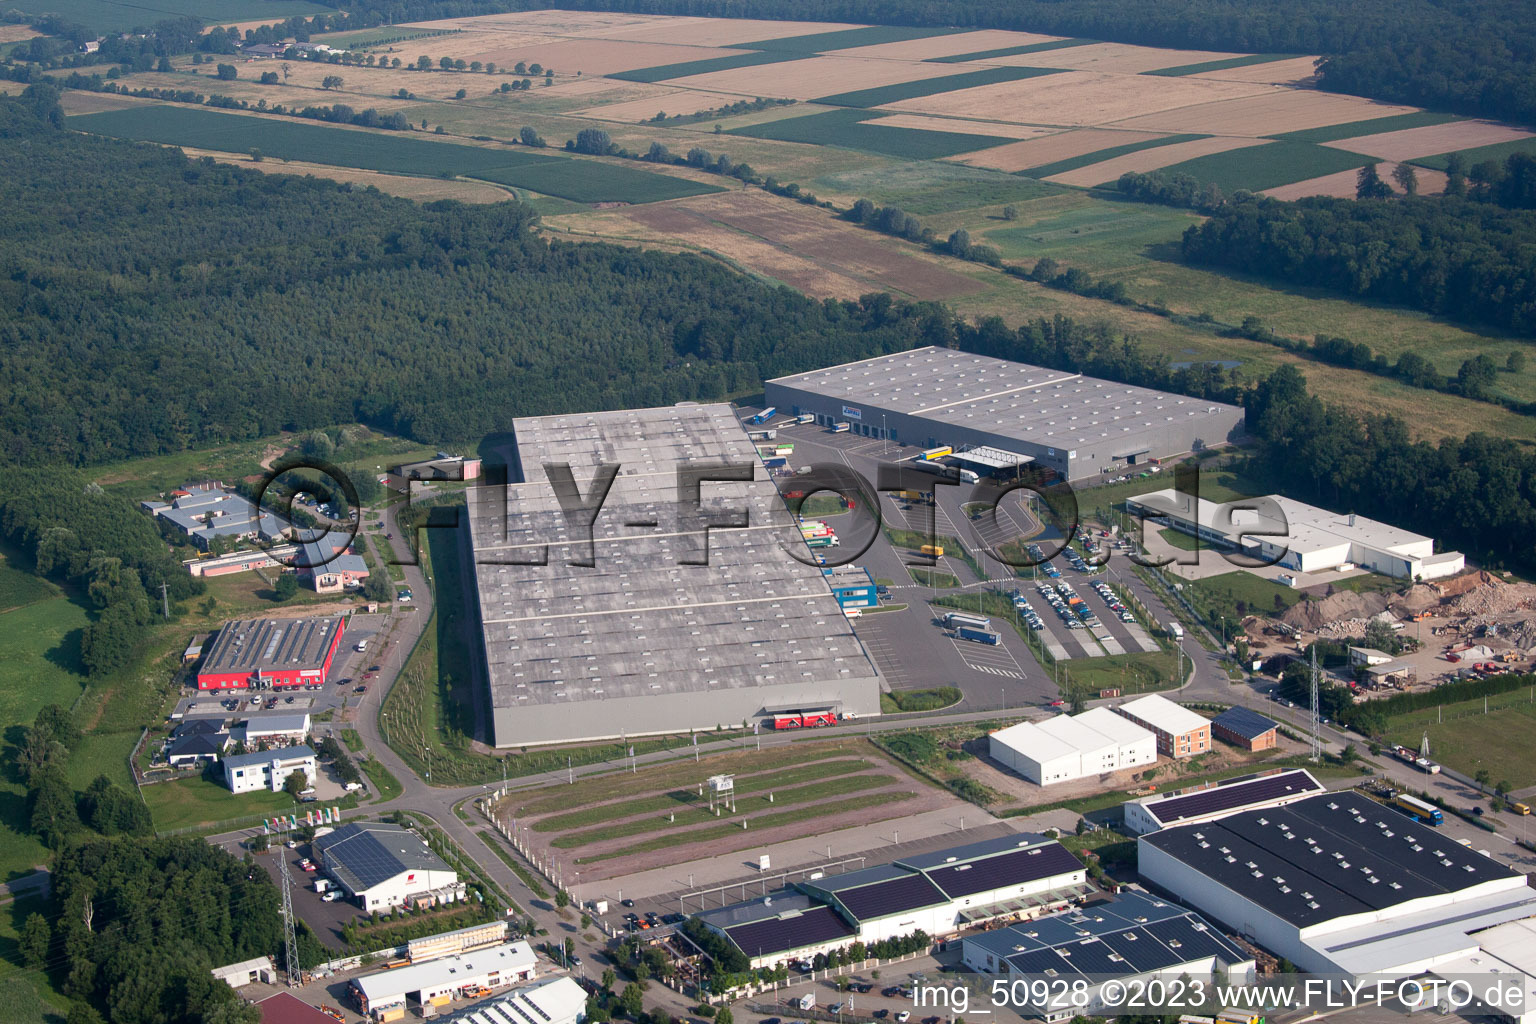 Oblique view of Horst industrial area, coincidence logistics center in the district Minderslachen in Kandel in the state Rhineland-Palatinate, Germany